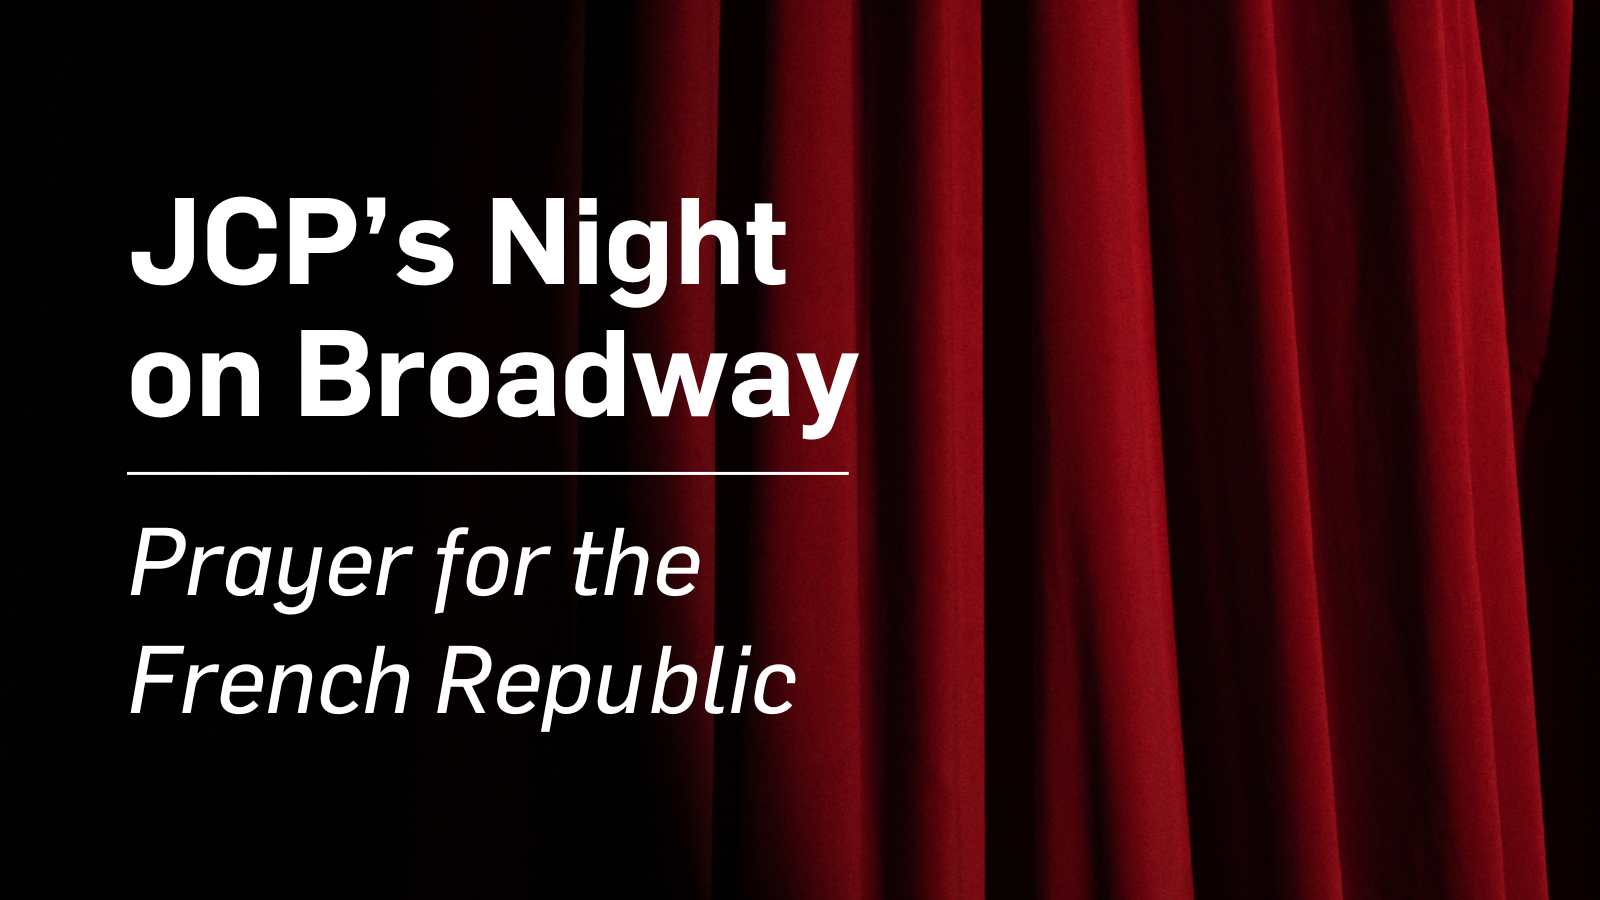 JCP’s Night on Broadway: Prayer for the French Republic